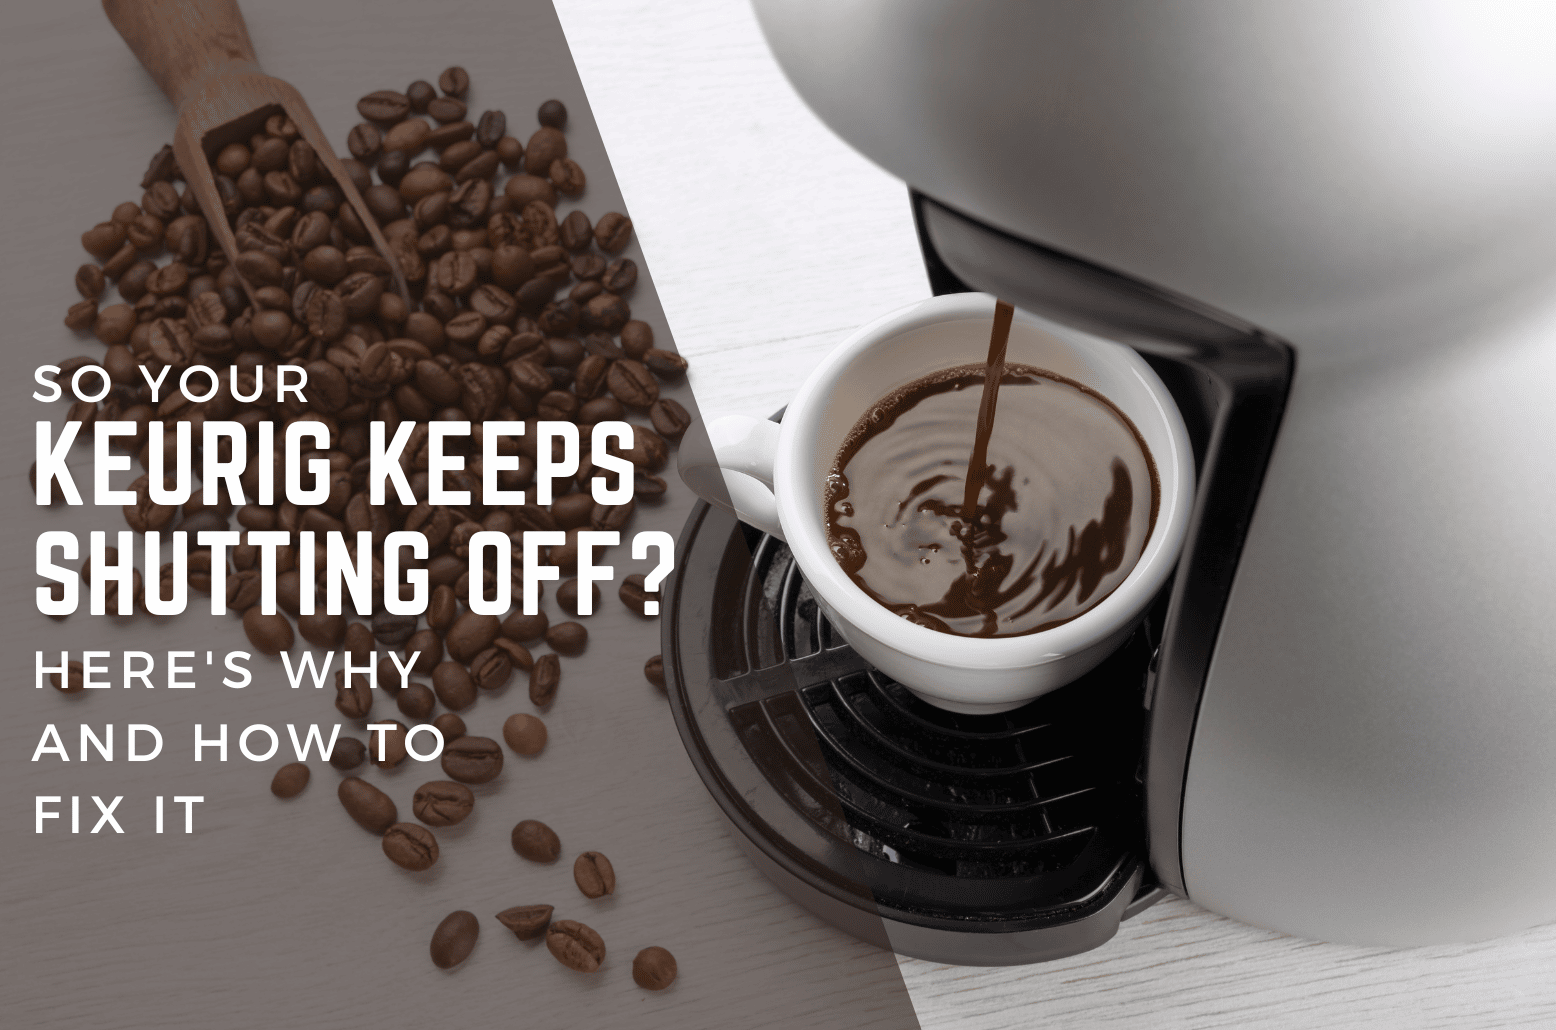 So Your Keurig Keeps Shutting Off. Here’s Why and How to Fix It.